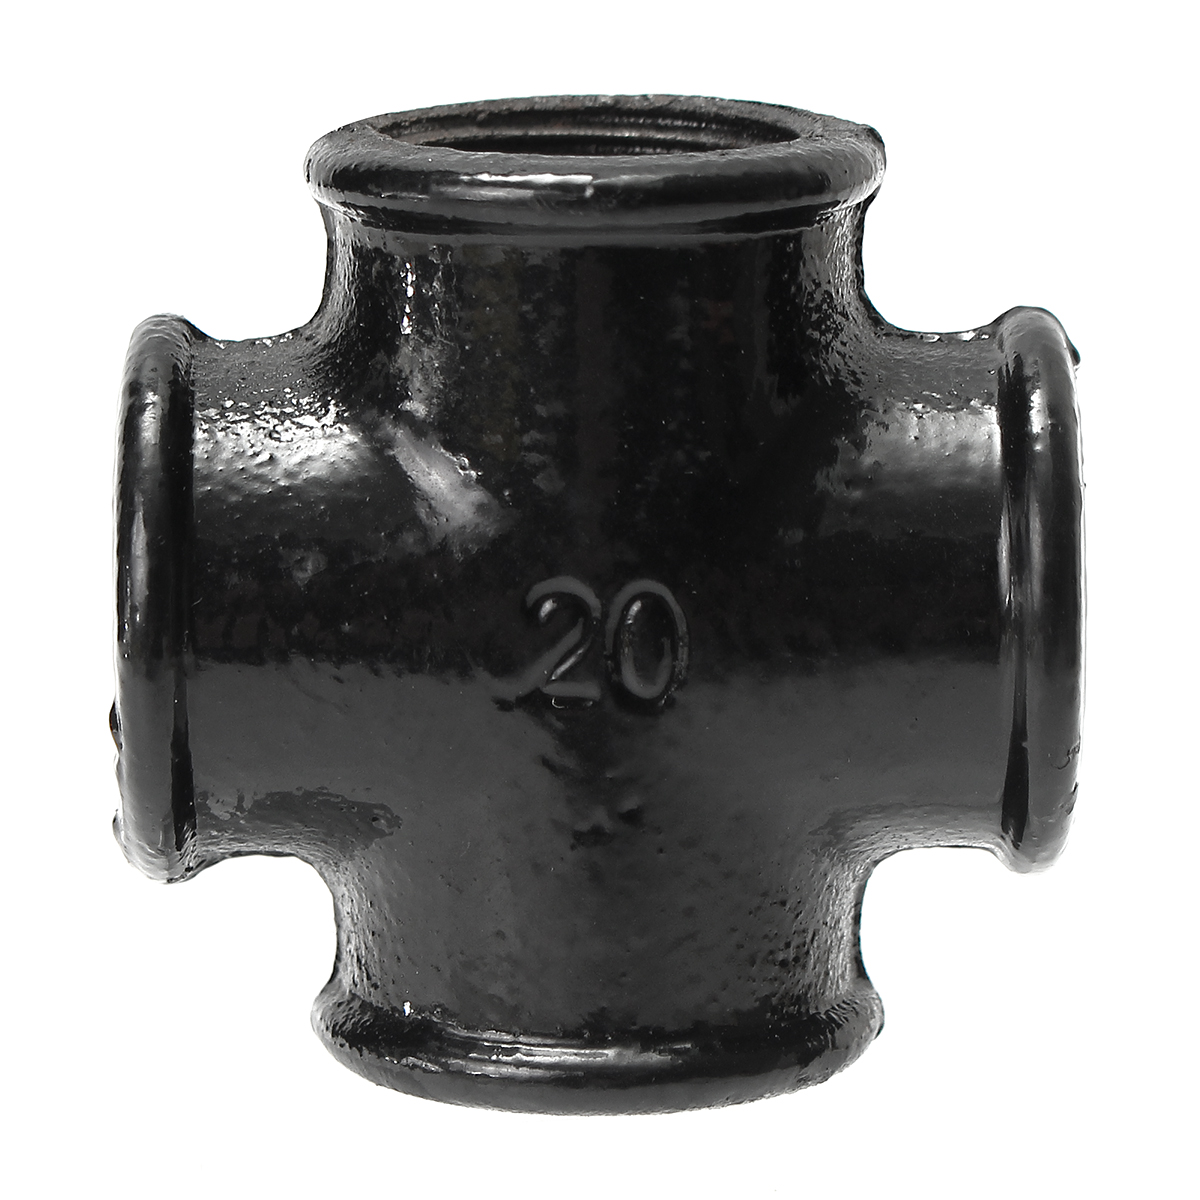 34-Inch-Black-Iron-Pipe-Threaded-Cross-Fitting-Plumbing-Malleable-Cross-Pipes-Fittings-1334049-3